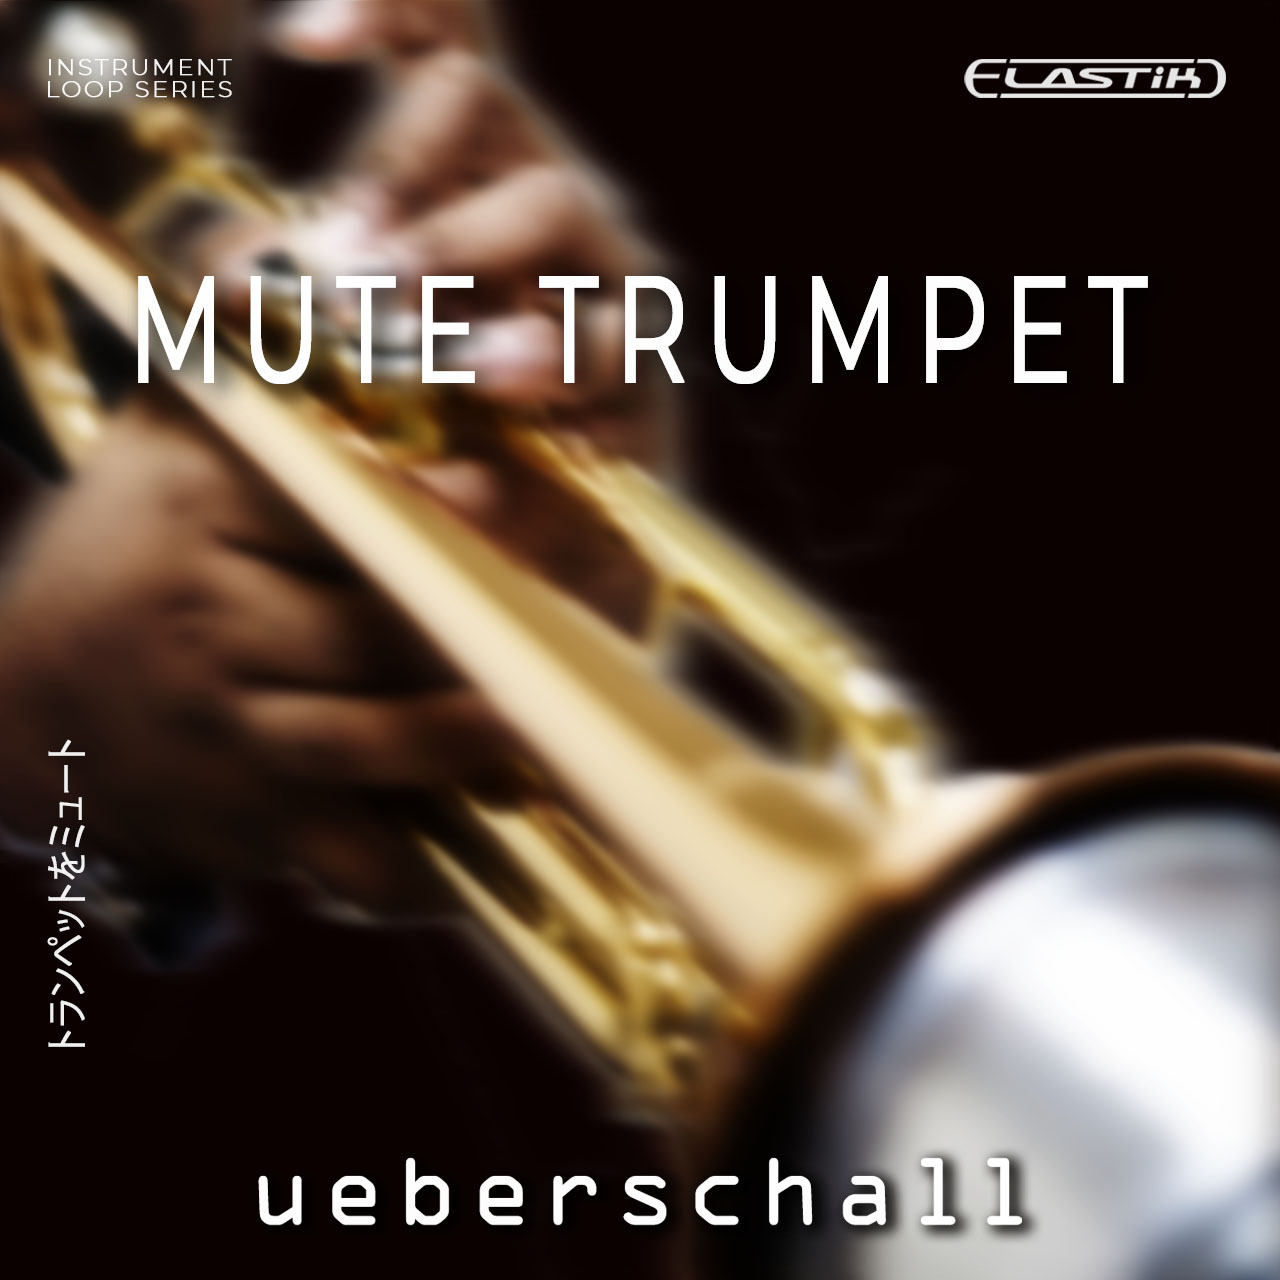 Intimate Mute Trumpet: Emotive Downtempo, Timeless Sound – Soulful And Jazzy